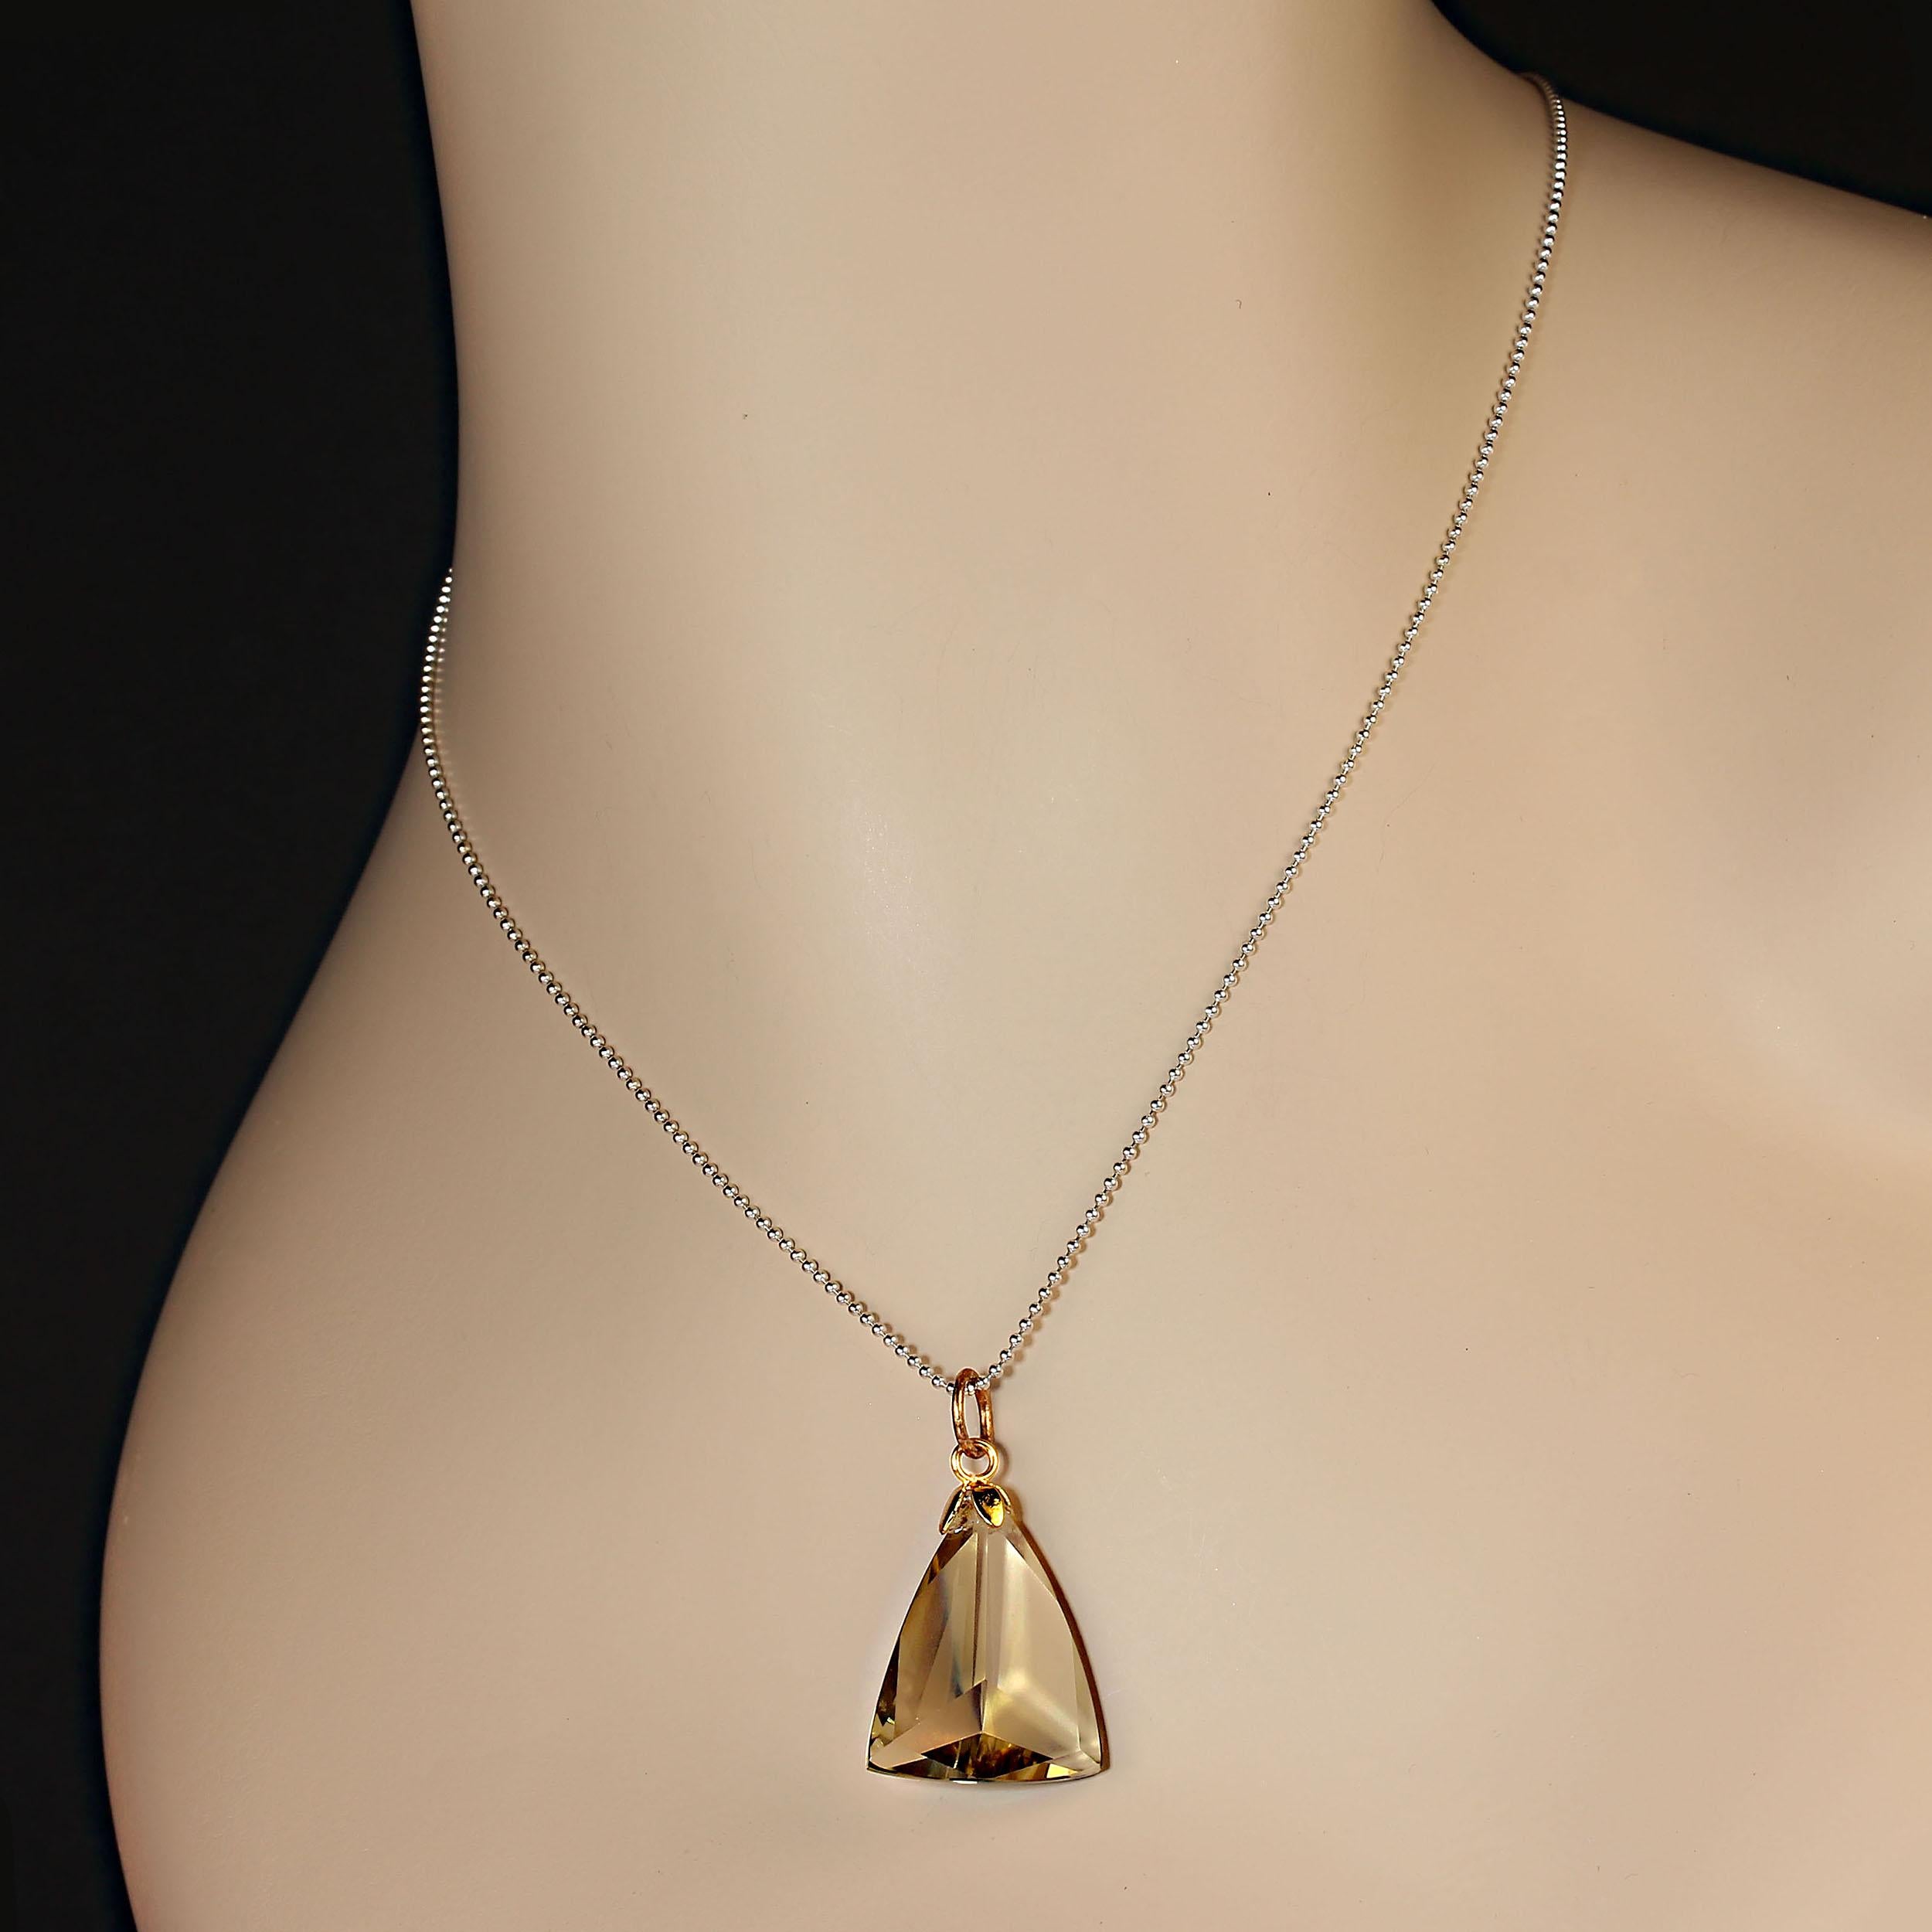 Lovely Green gold quartz triangular pendant, 20 x 25 MM which is faceted on both sides. The top is has a nice sized bail for your chains to slip through.  This great green gold is the perfect color to coordinate with all your winter ensembles.  This